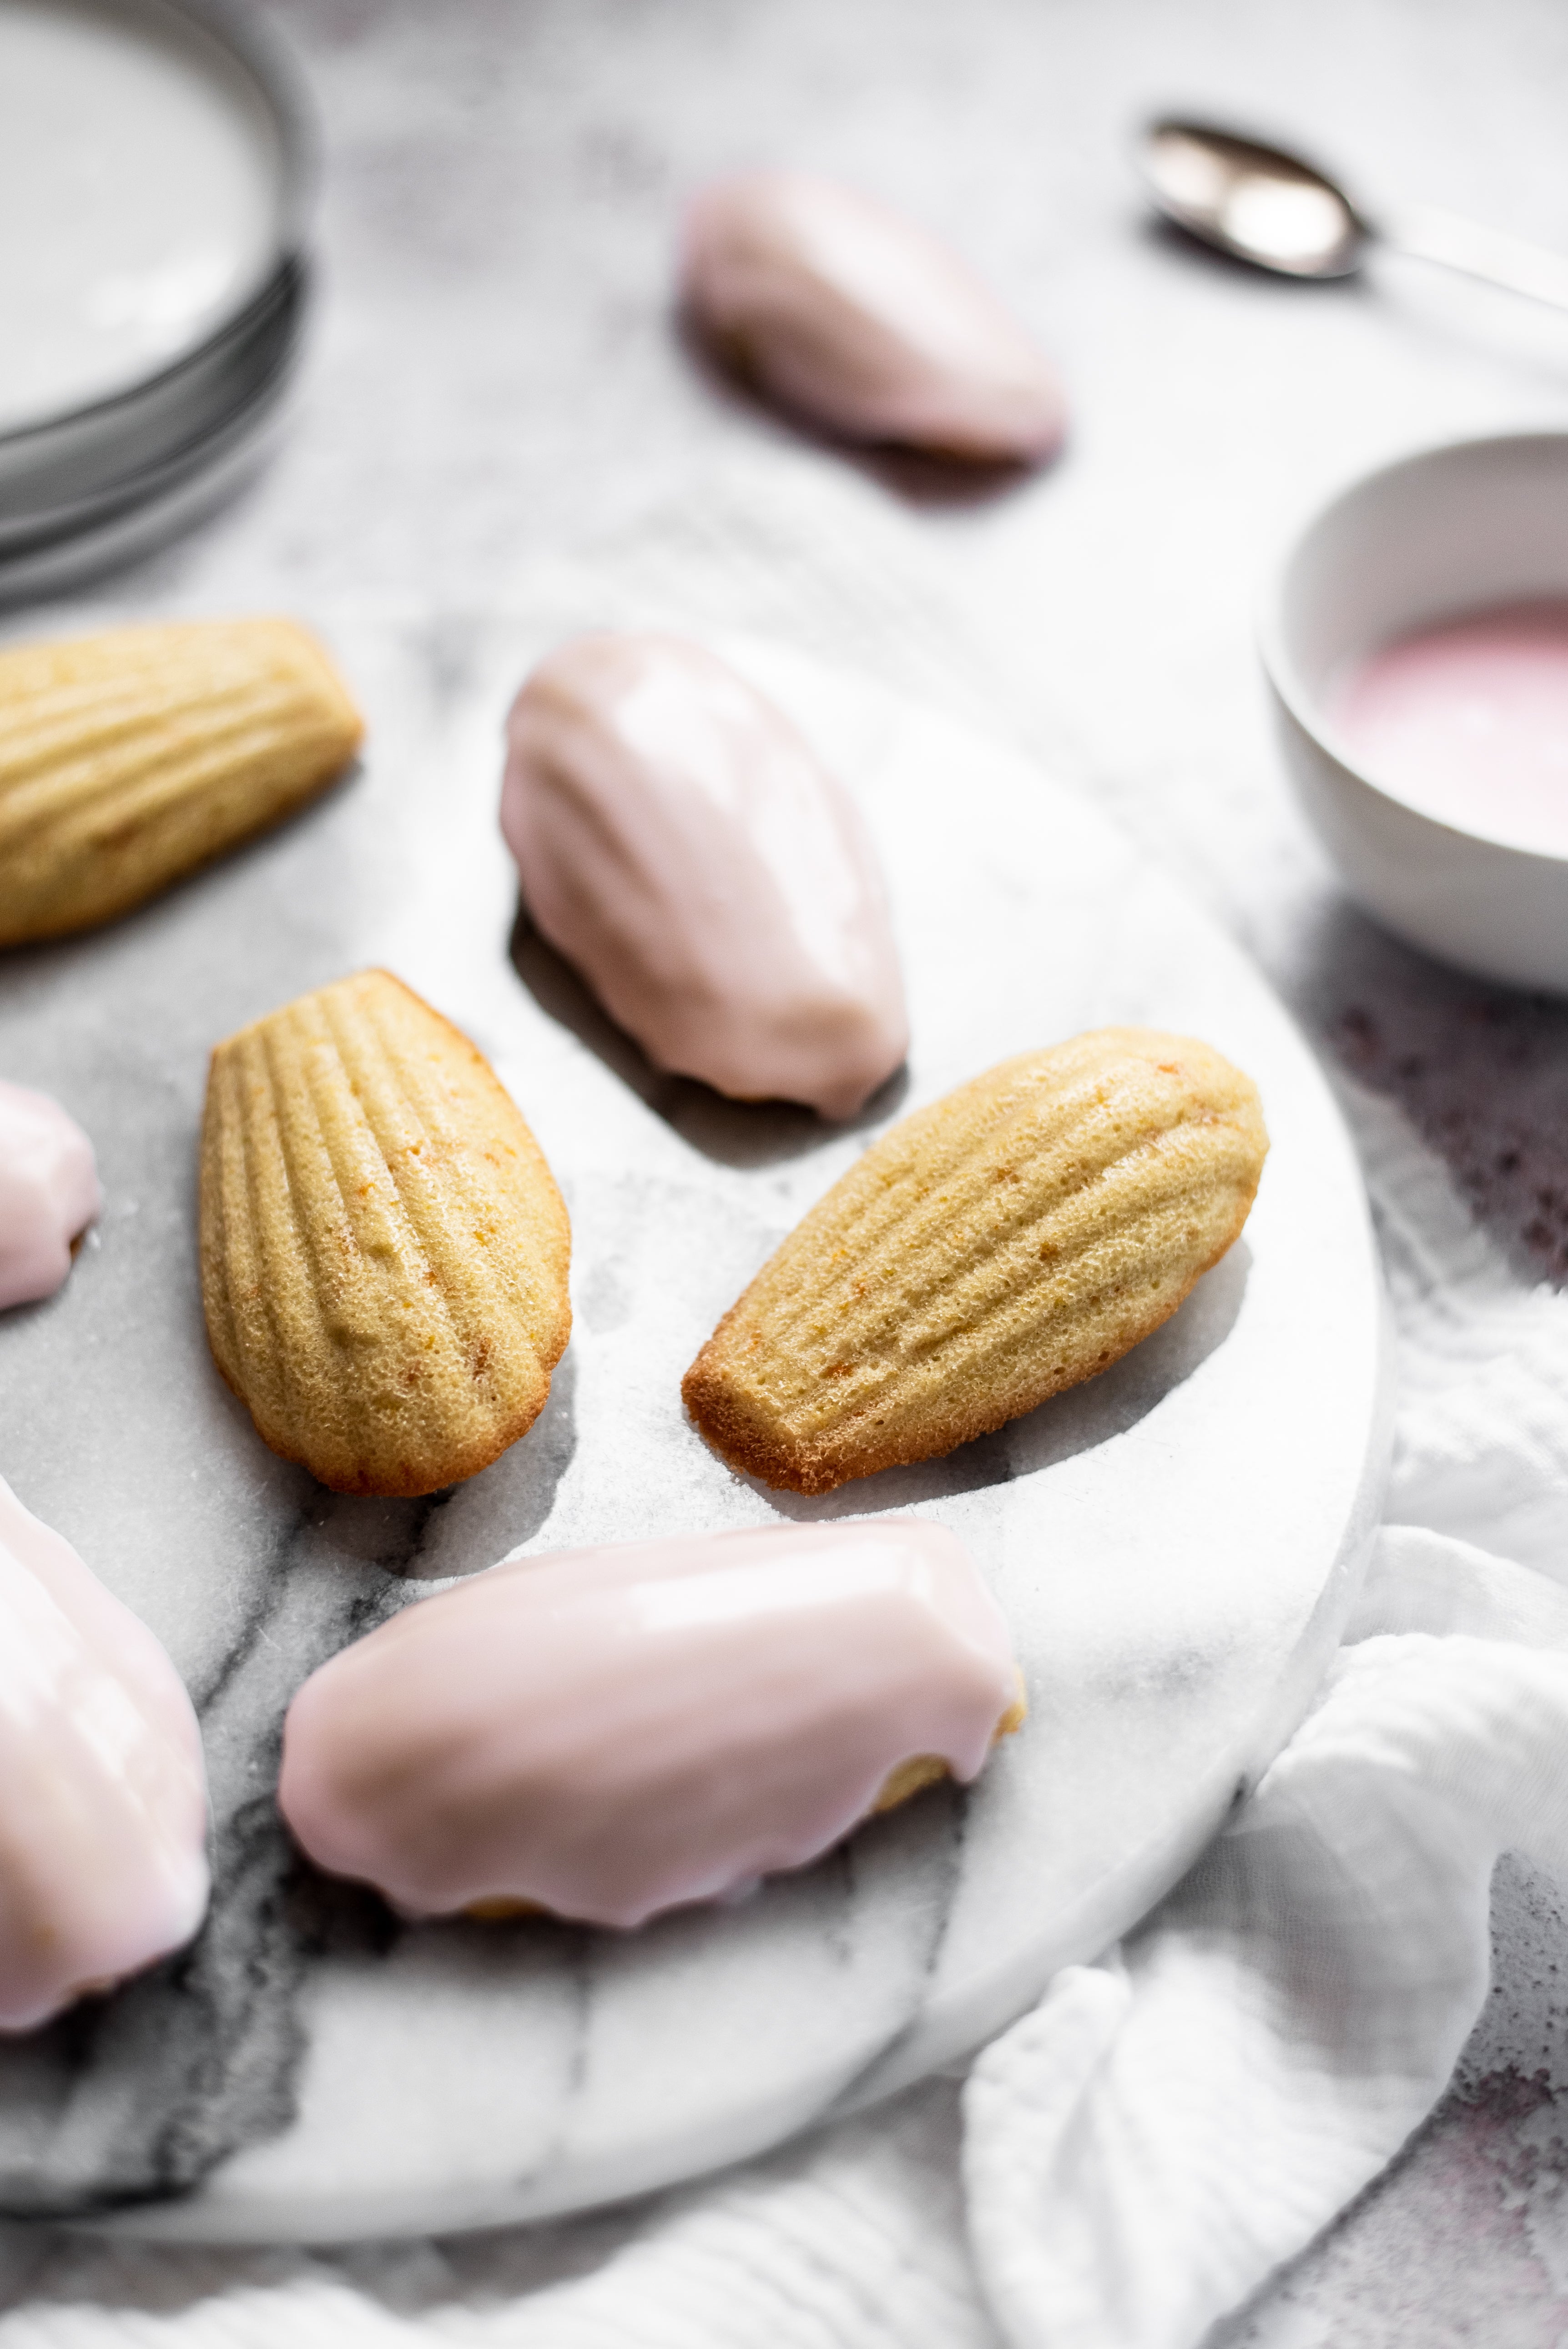 Madeleine sponge cakes with pink icing